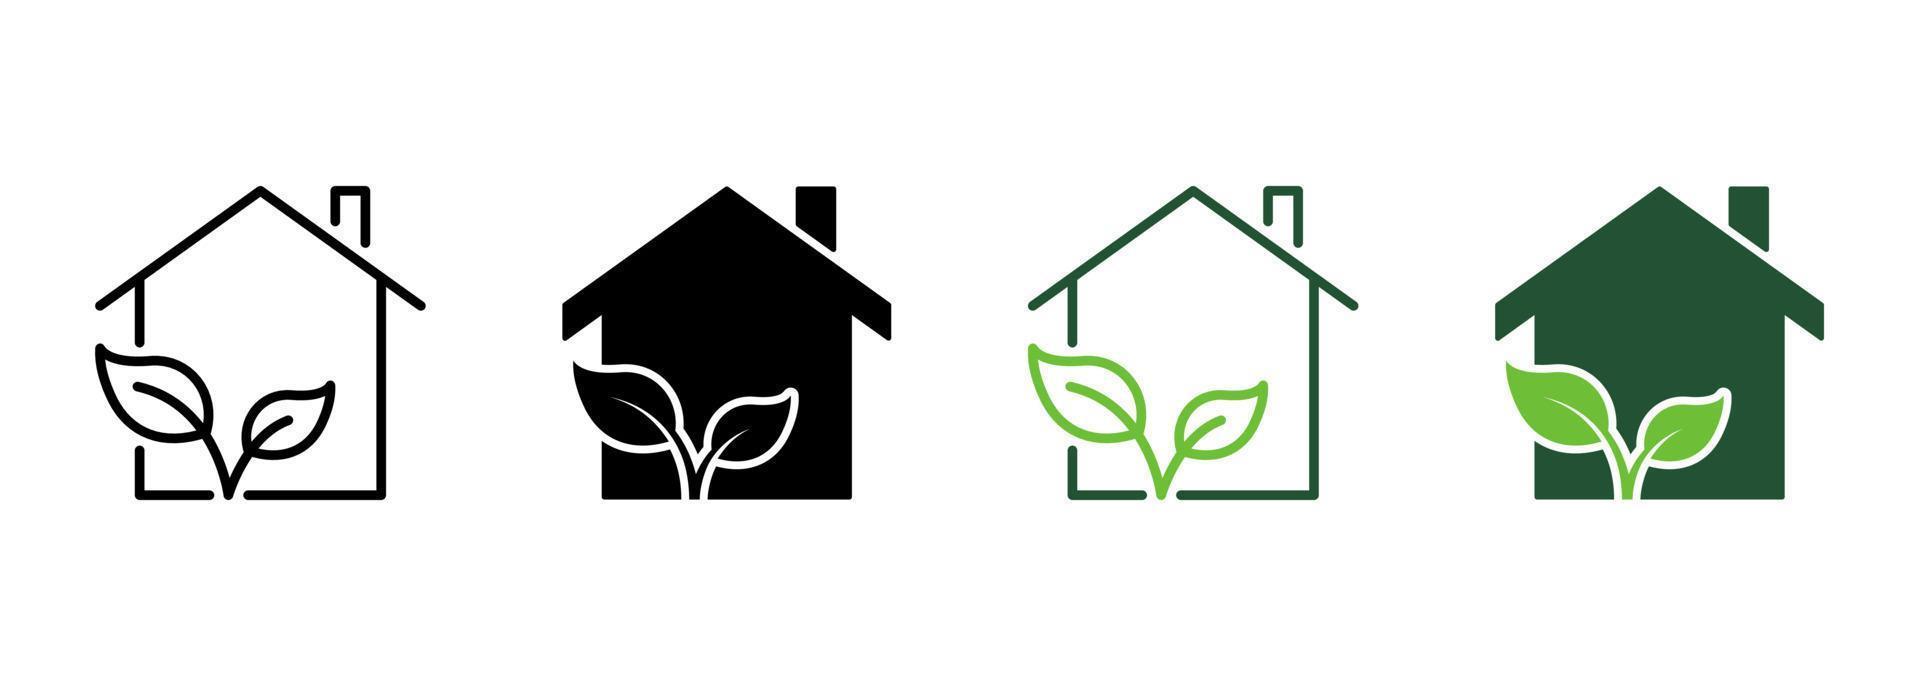 Eco Green House Line and Silhouette Icon Color Set. Ecology Real Estate Building with Leaf Pictogram. Bio Natural House Symbol Collection on White Background. Isolated Vector Illustration.